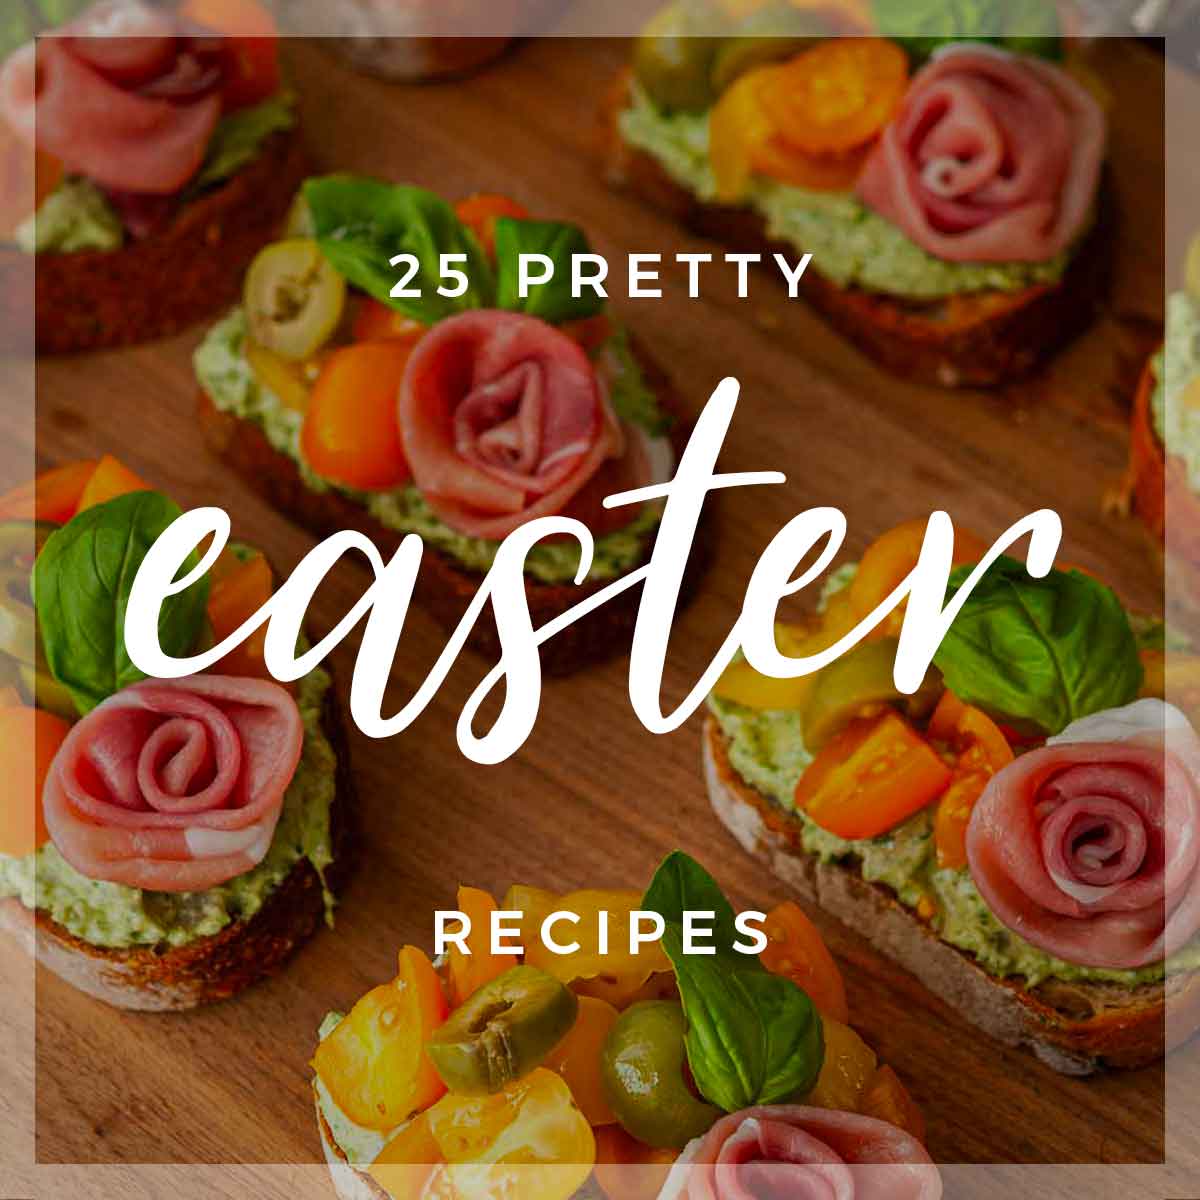 A plate of appetizers with a title that says "25 Pretty Easter Appetizers."